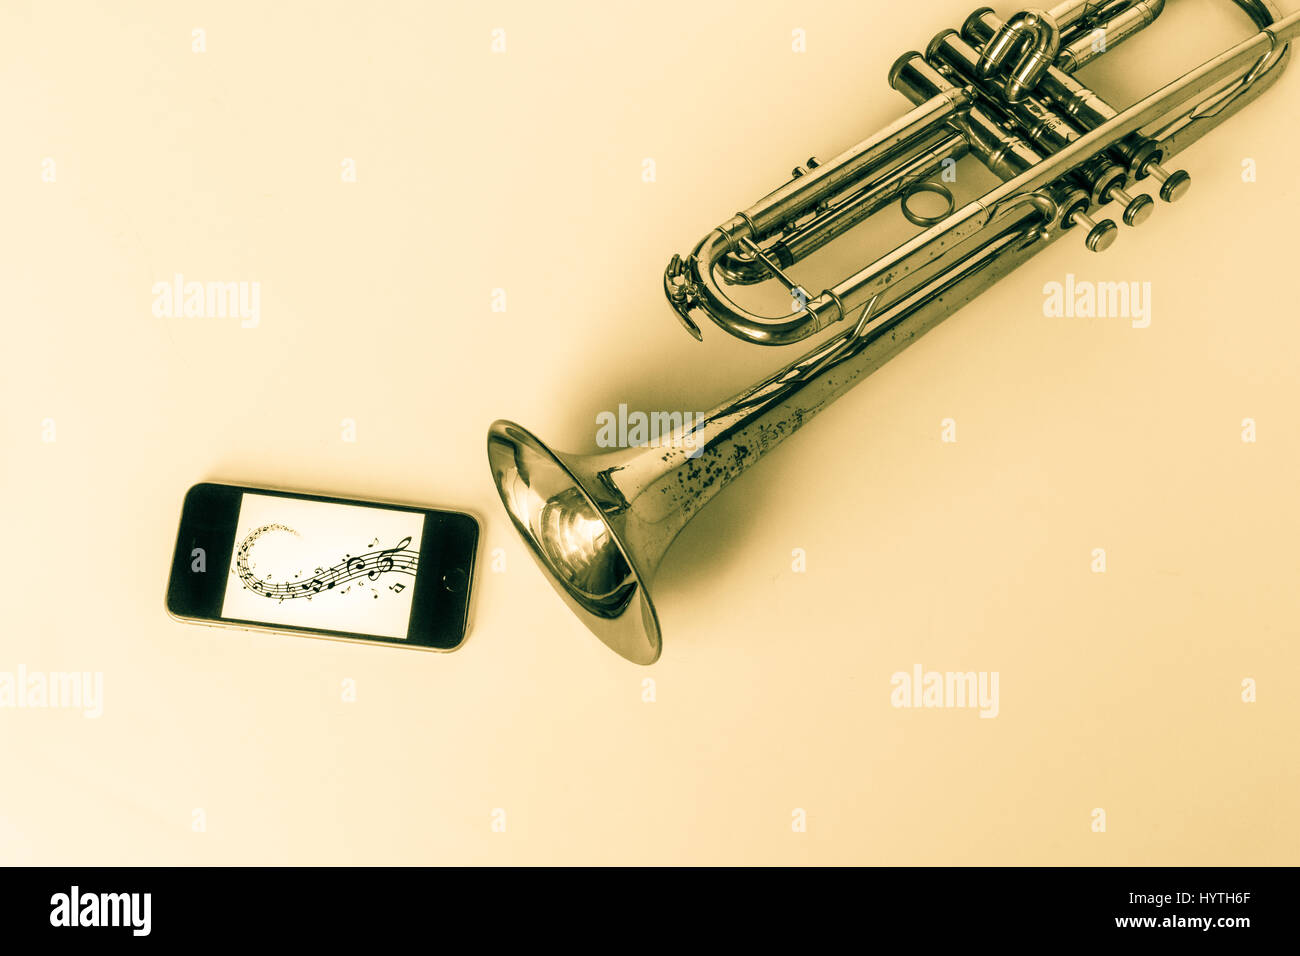 Old Trumpet with tinted screen playing music on cell phone Stock Photo